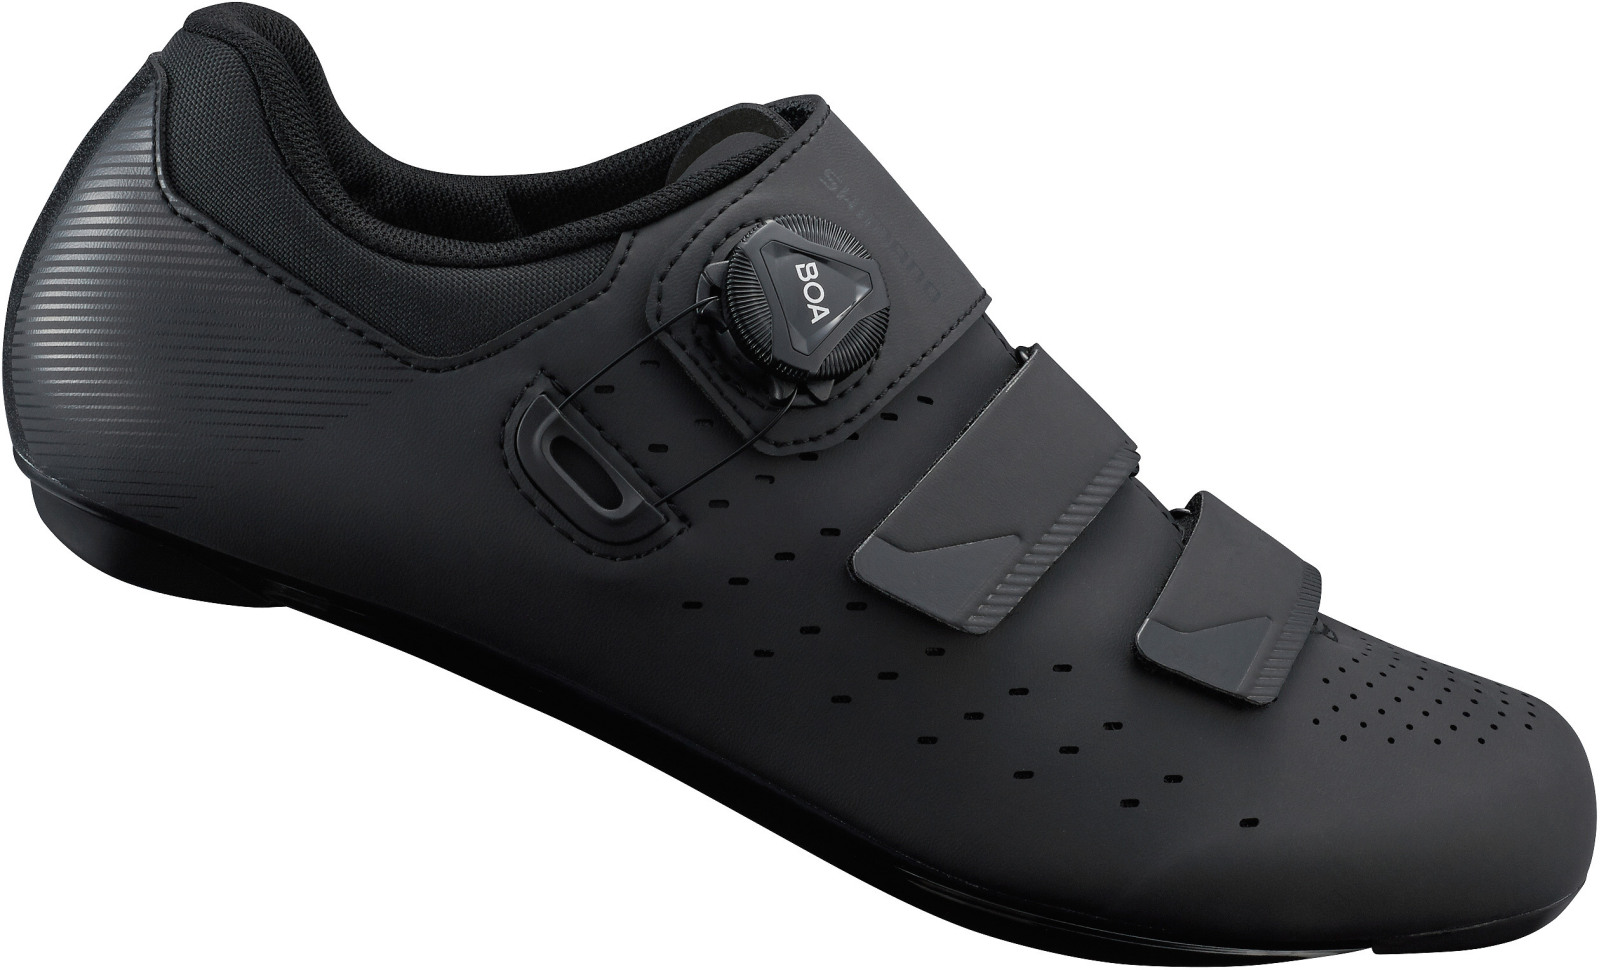 Shimano RP4 SPD-SL Road Shoes - Clearance Shoes - Cycle SuperStore